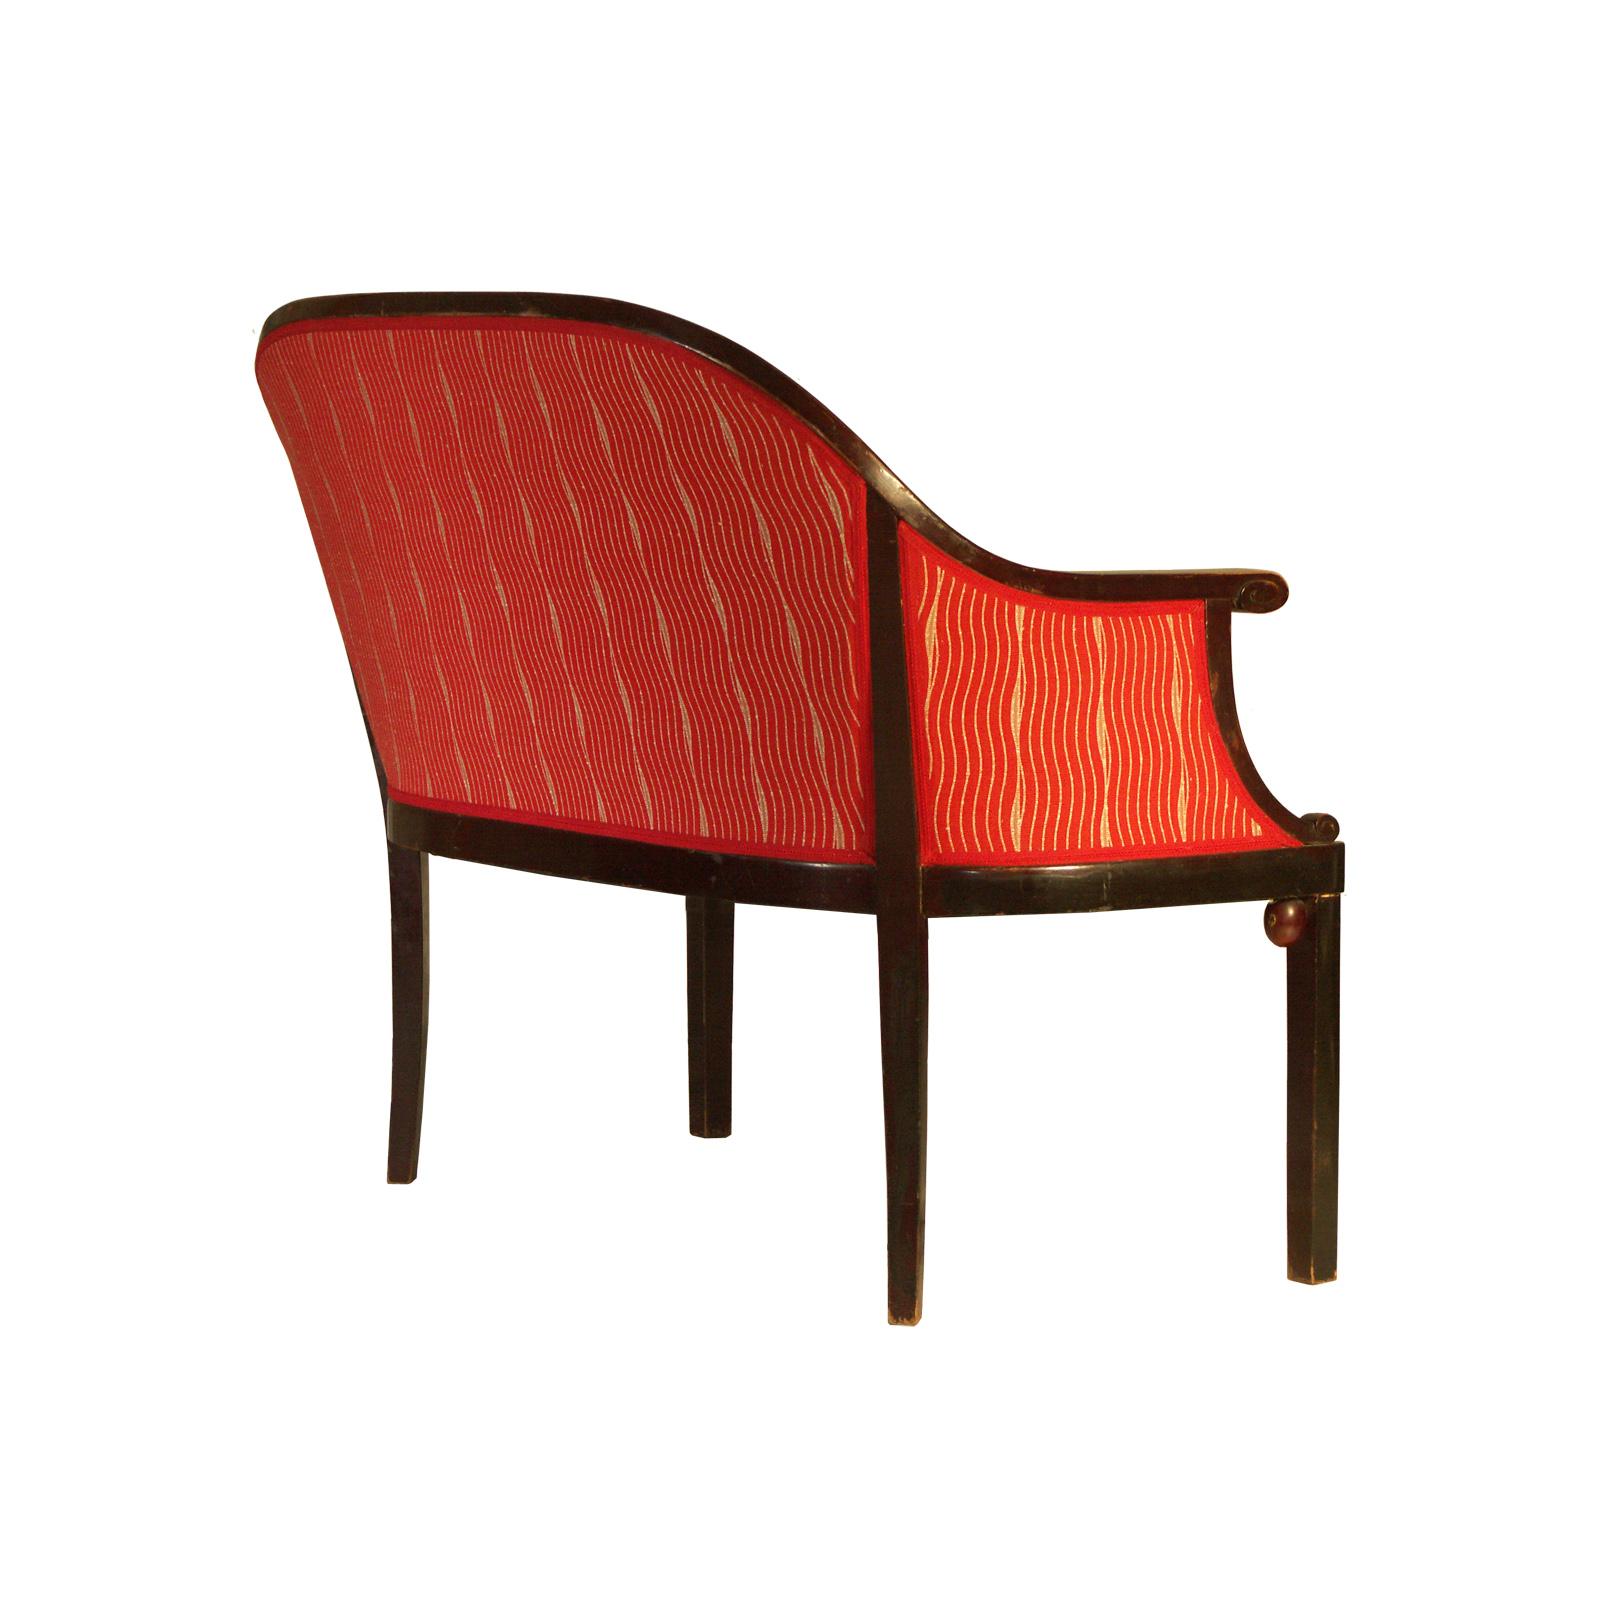 Attributed to either Josef Hoffmann or Otto Prutscher as both of the designers did similar objects in bentwood at this time, and both were using balls or olives for joining the legs with the body of a furniture. Upholstery renovated.